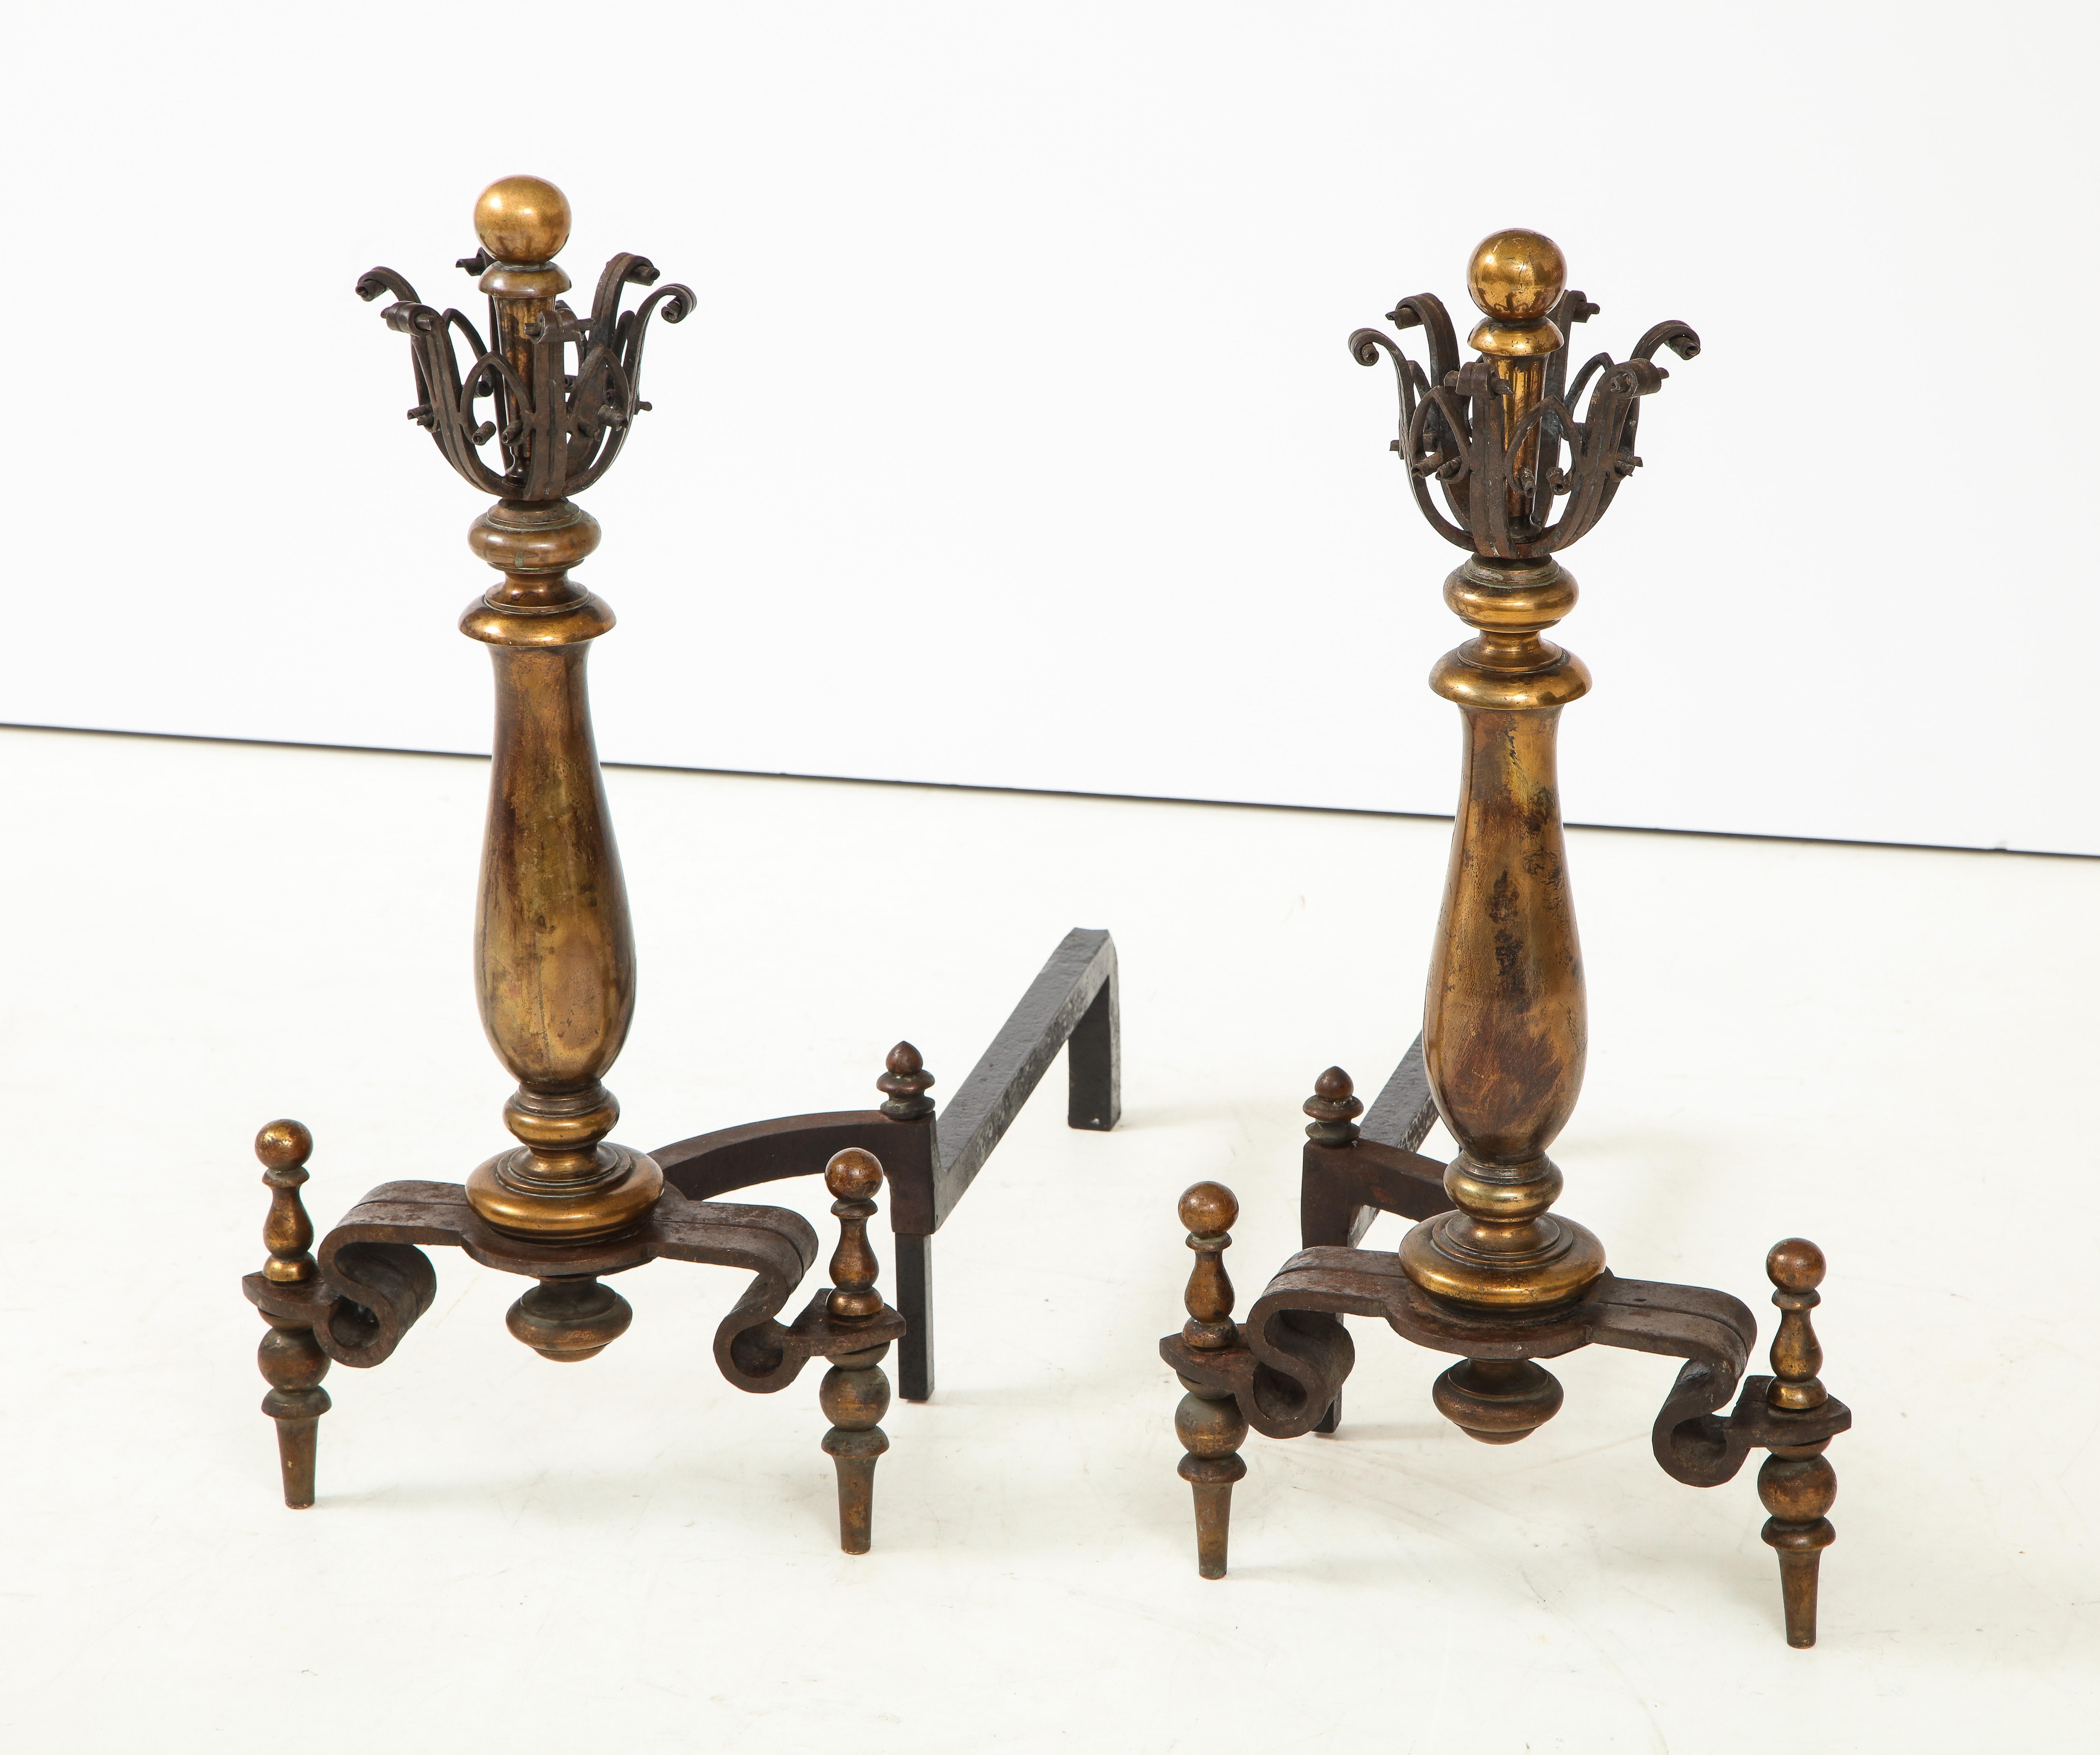 Pair of French Art Deco heavy iron and brass spindle andirons with hand wrought decorative trim.